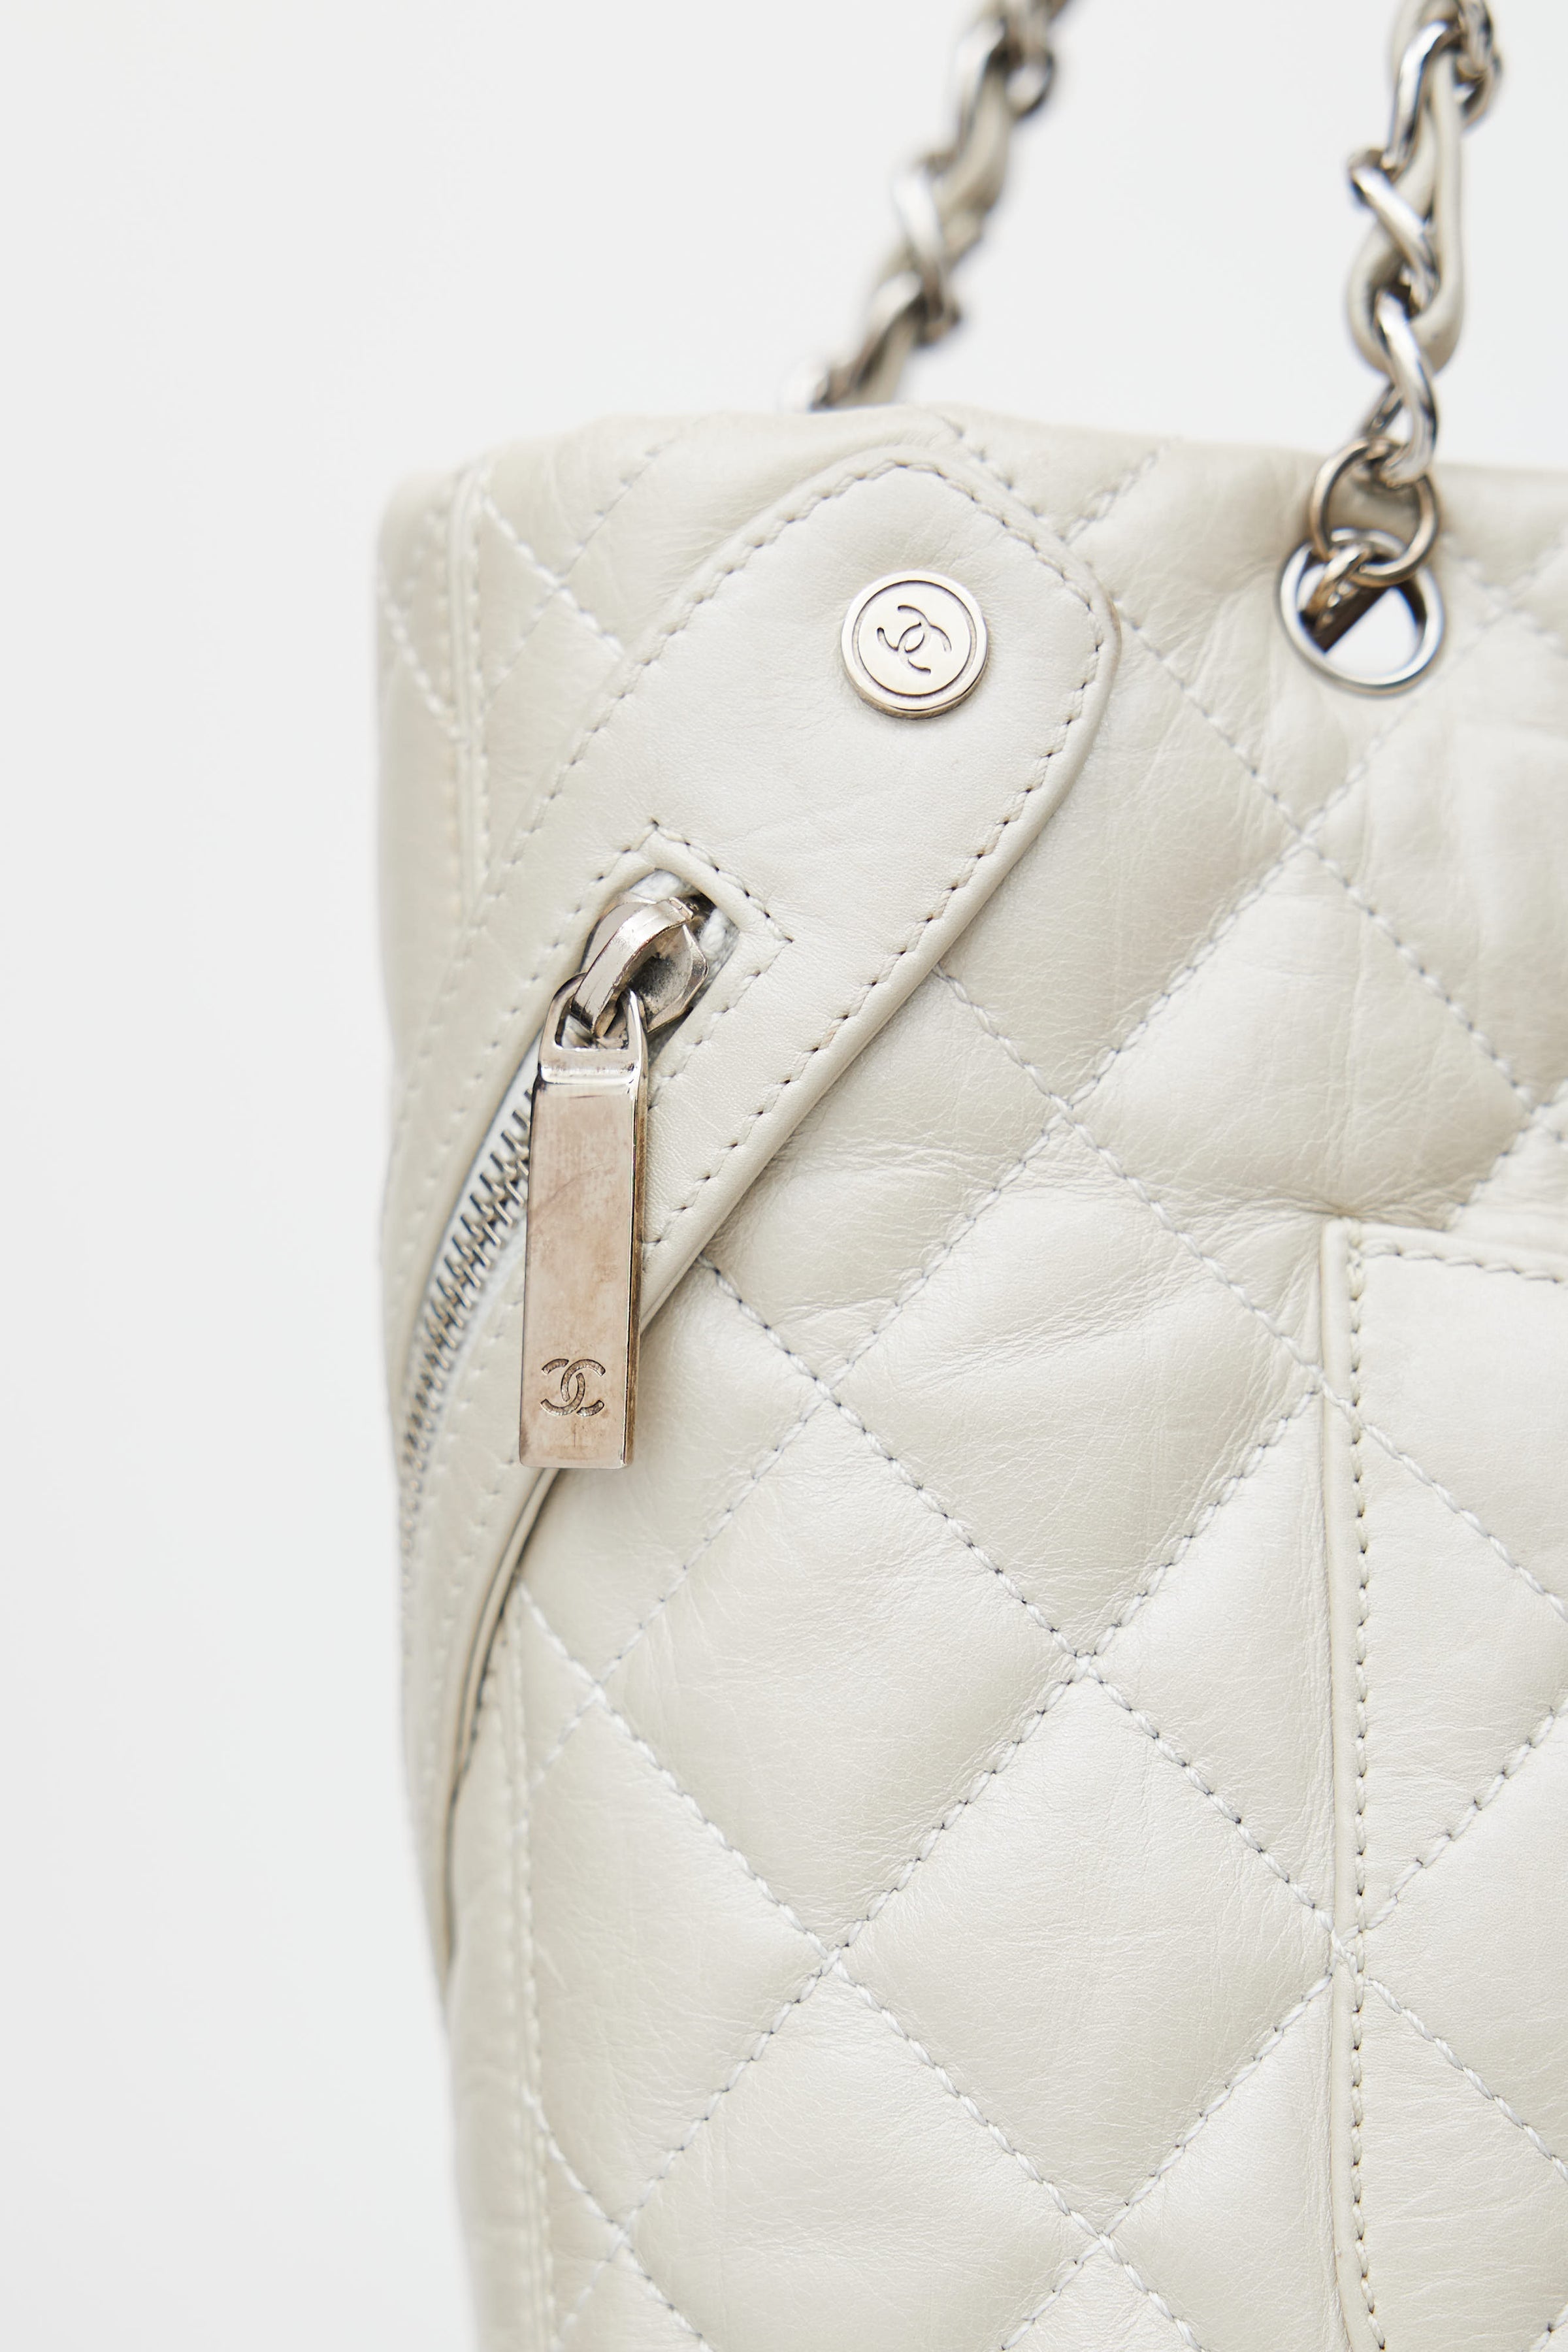 Chanel Grey Quilted Leather CC Bucket Bag Chanel